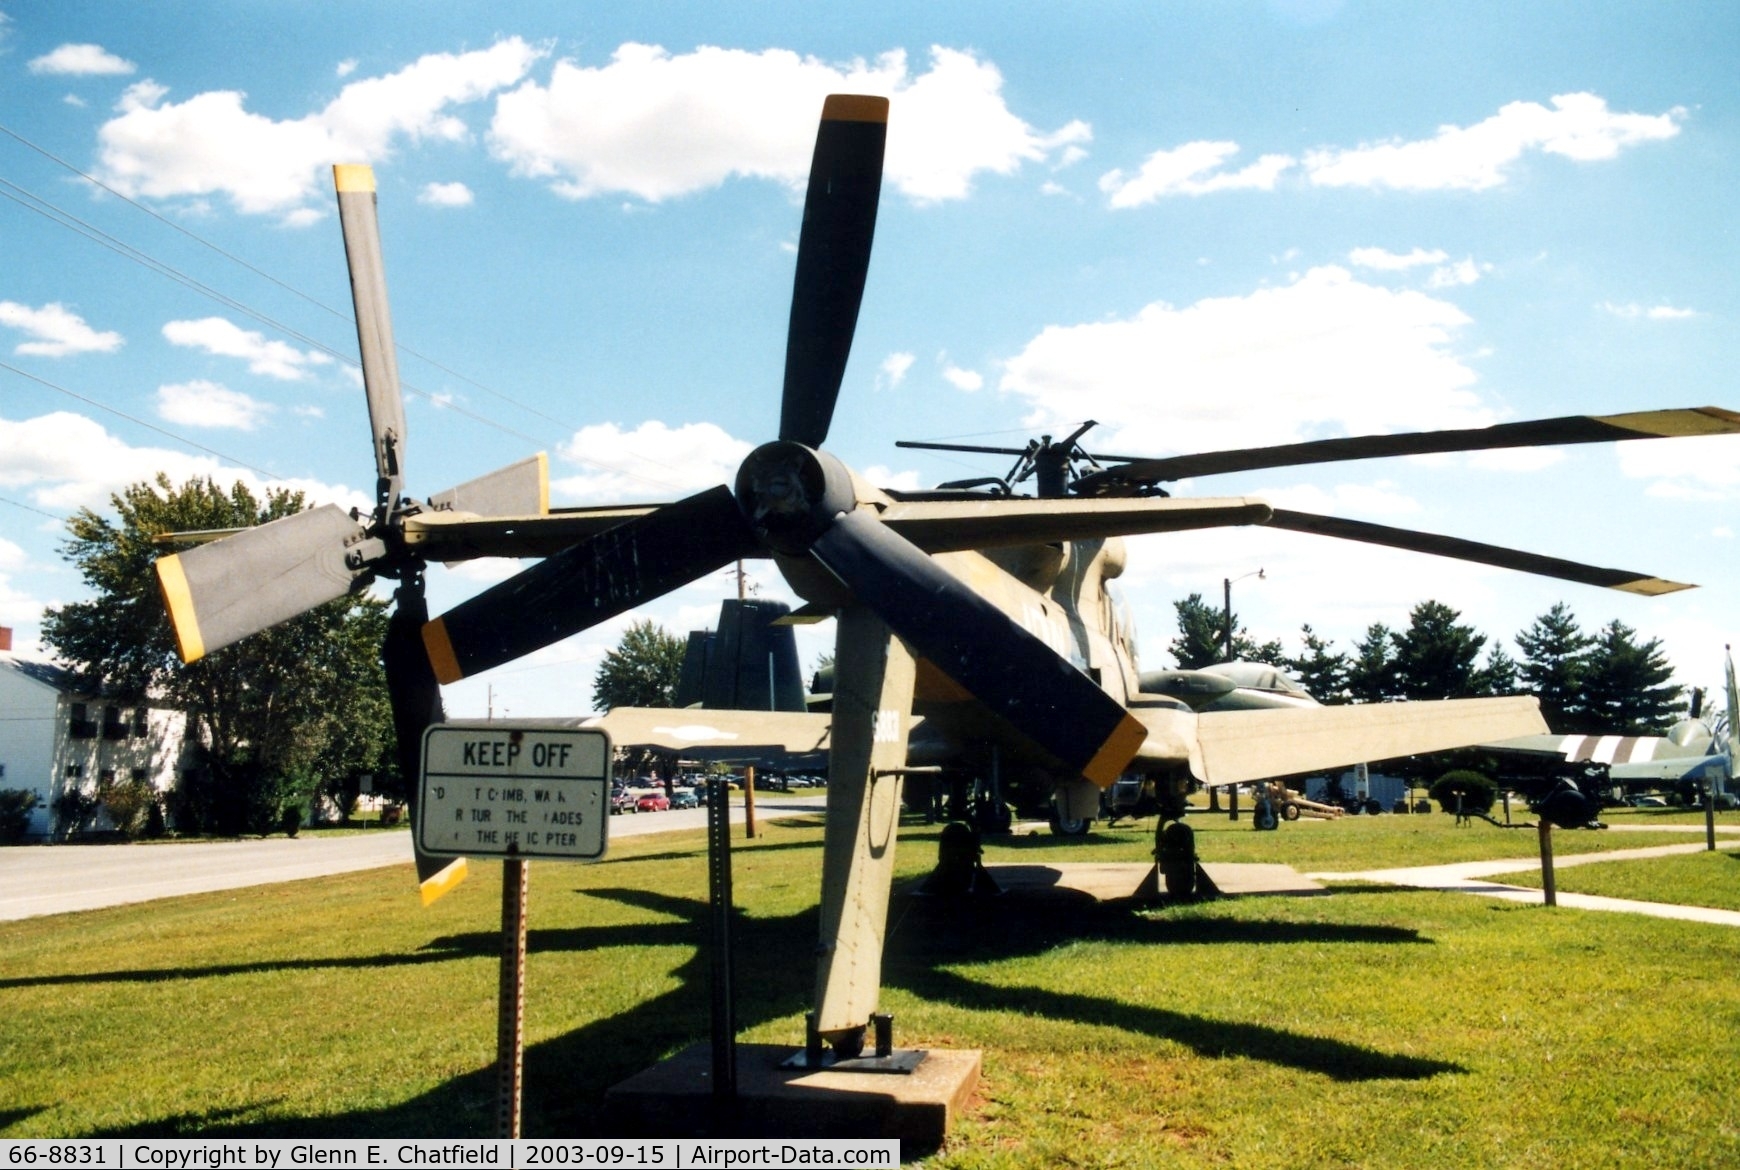 66-8831, 1968 Lockheed AH-56A-LO Cheyenne C/N 1006, AH-56A at the 101st Airborne Division Museum, Ft. Campbell, KY